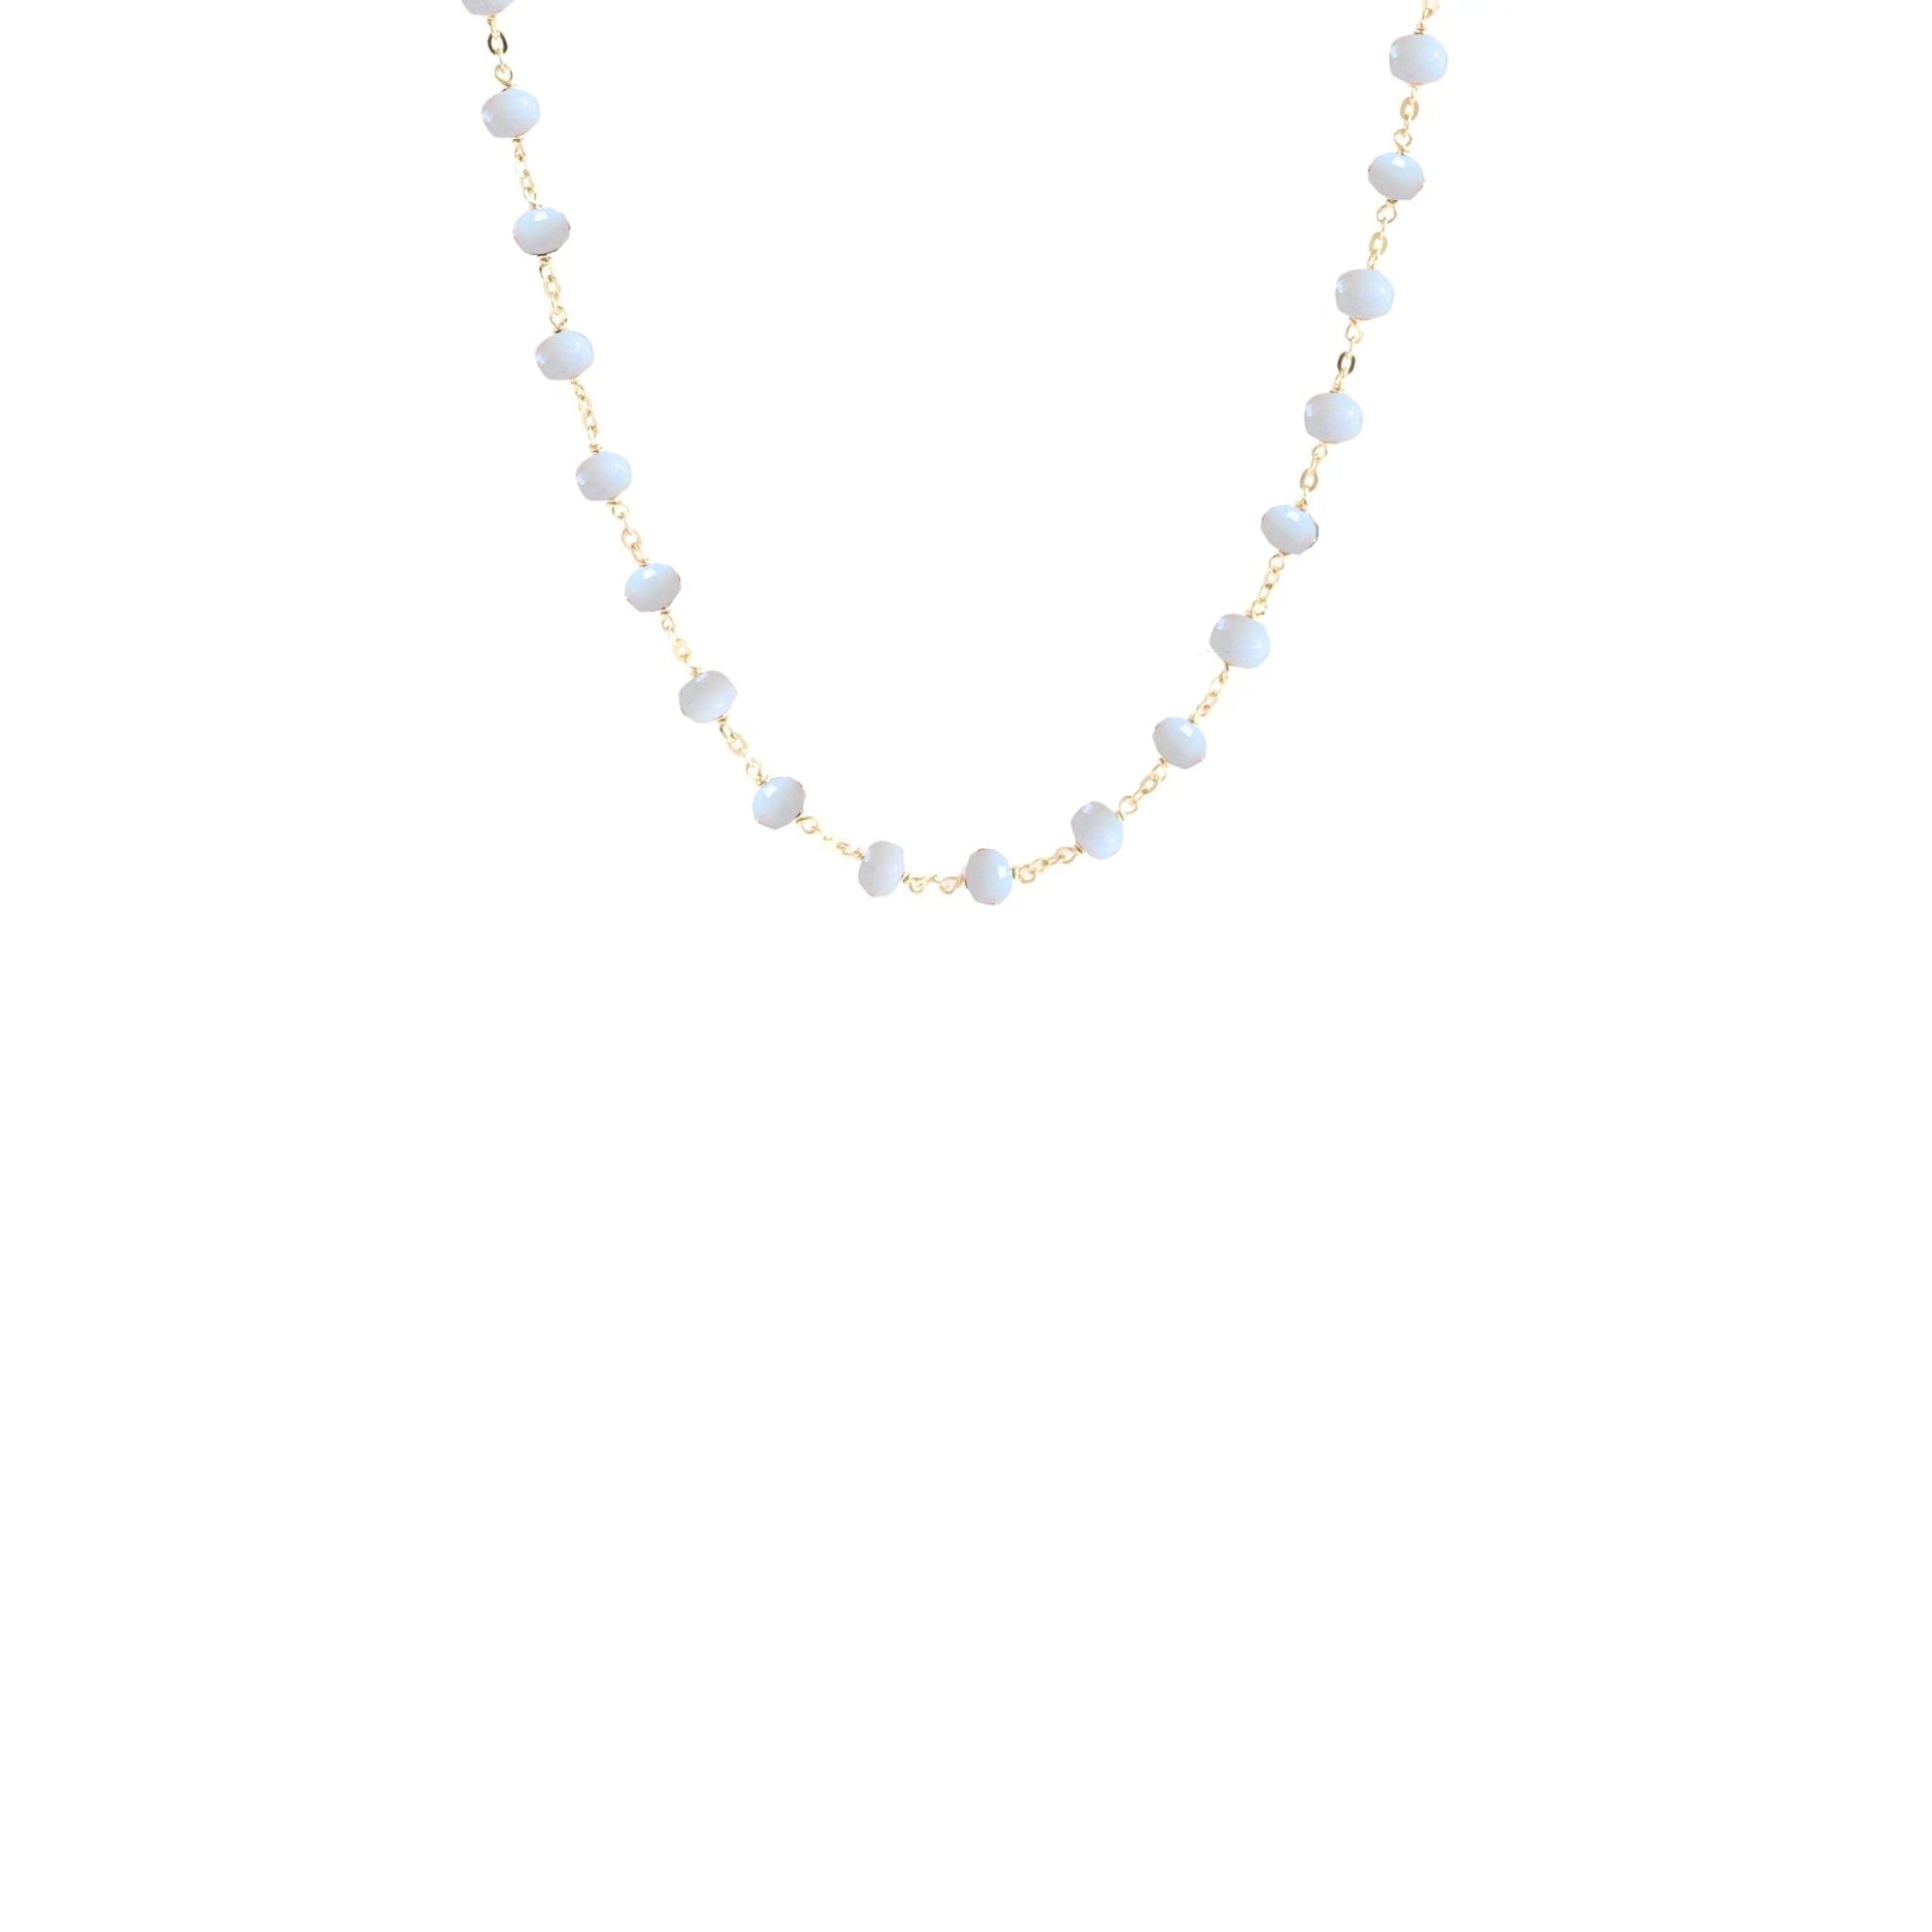 ICONIC SHORT BEADED NECKLACE - ARCTIC BLUE OPAL & GOLD 16-20" - SO PRETTY CARA COTTER